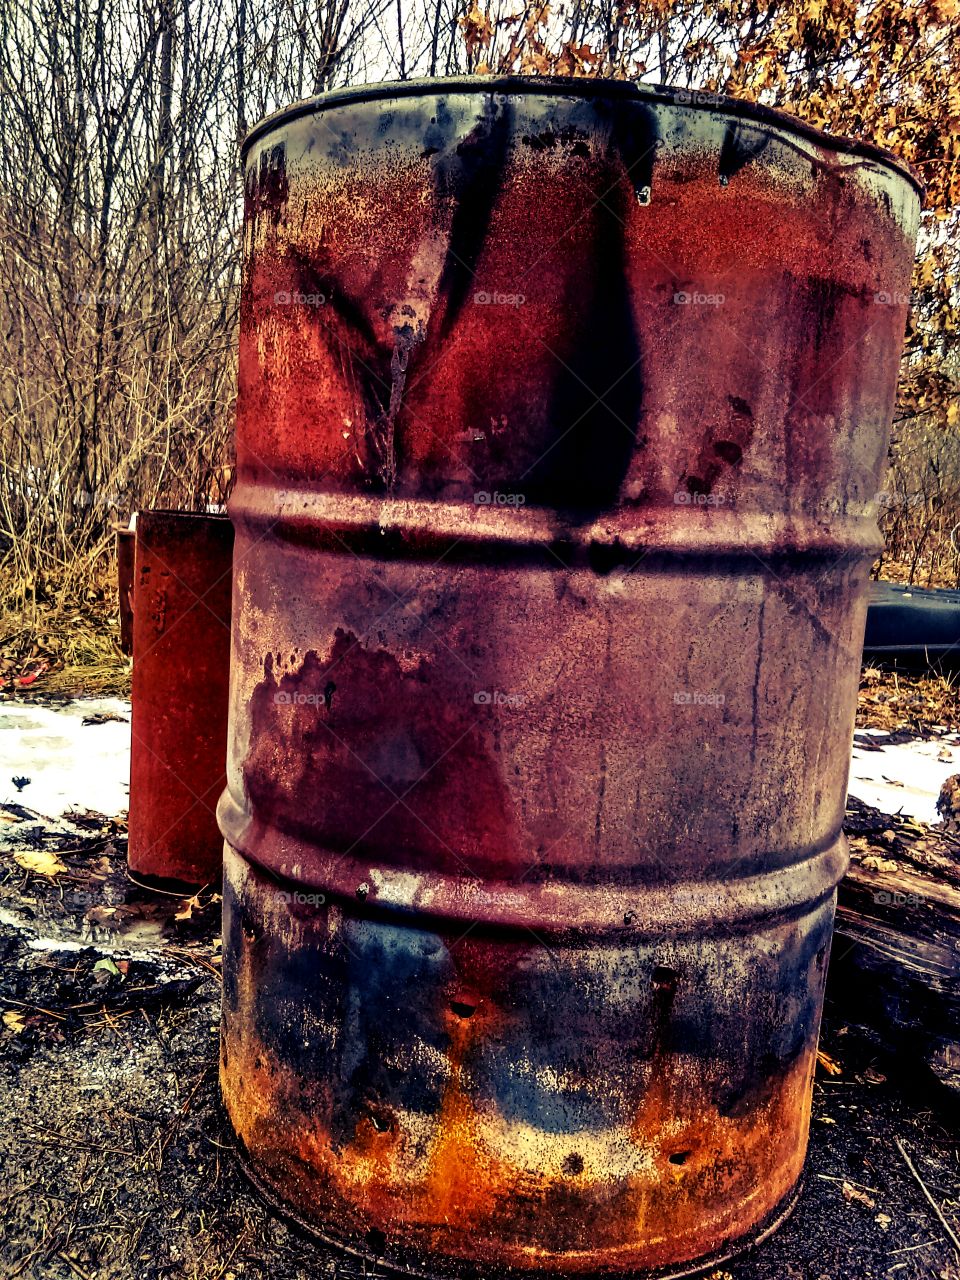 oil can and industrial chimney pipe.